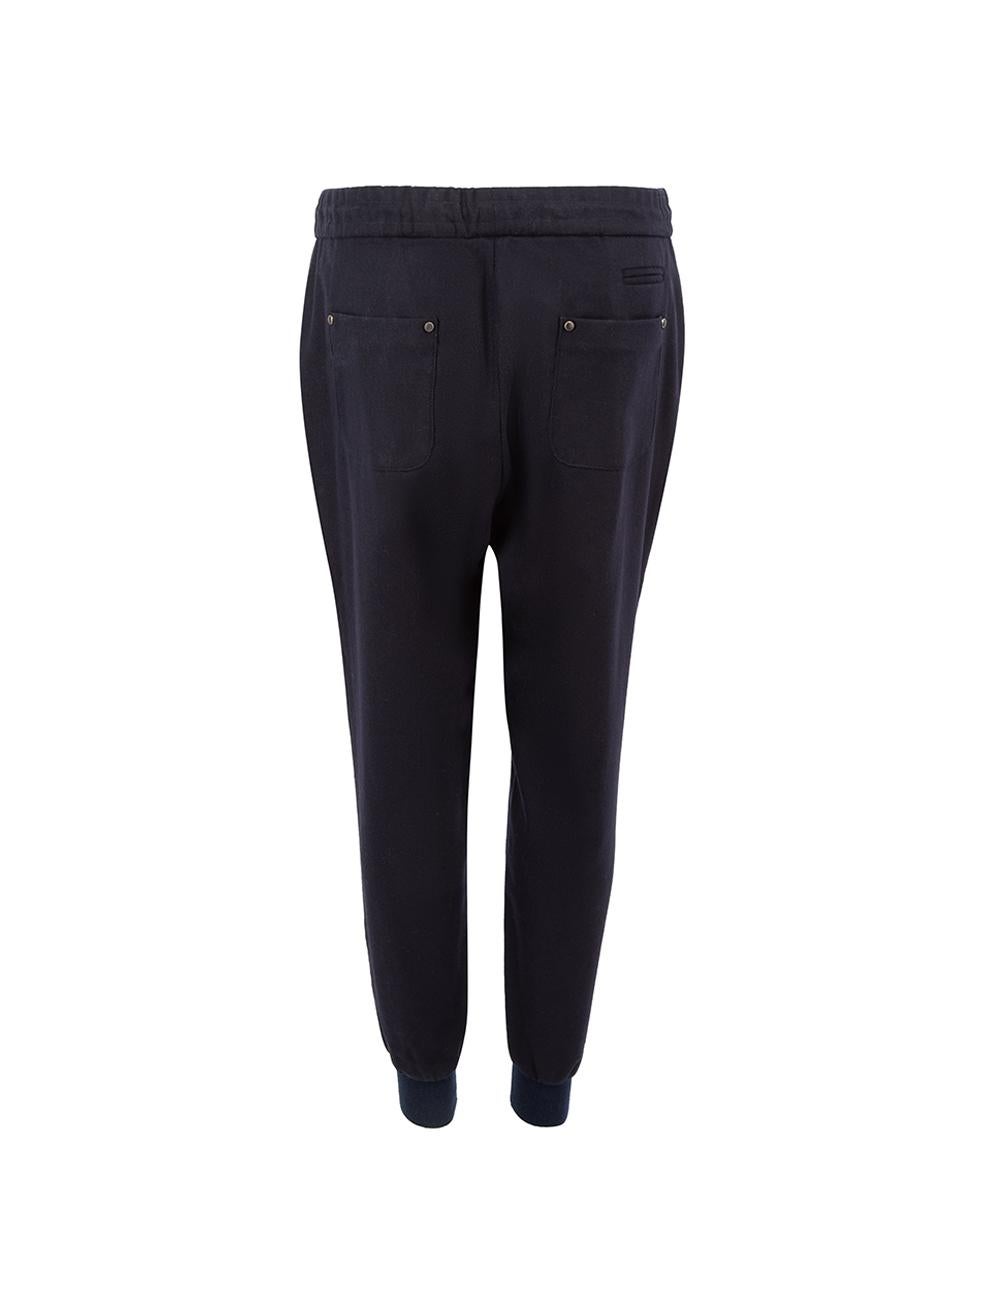 Fabiana Filippi Navy Blue Wool Jogging Trousers Size M In Good Condition In London, GB